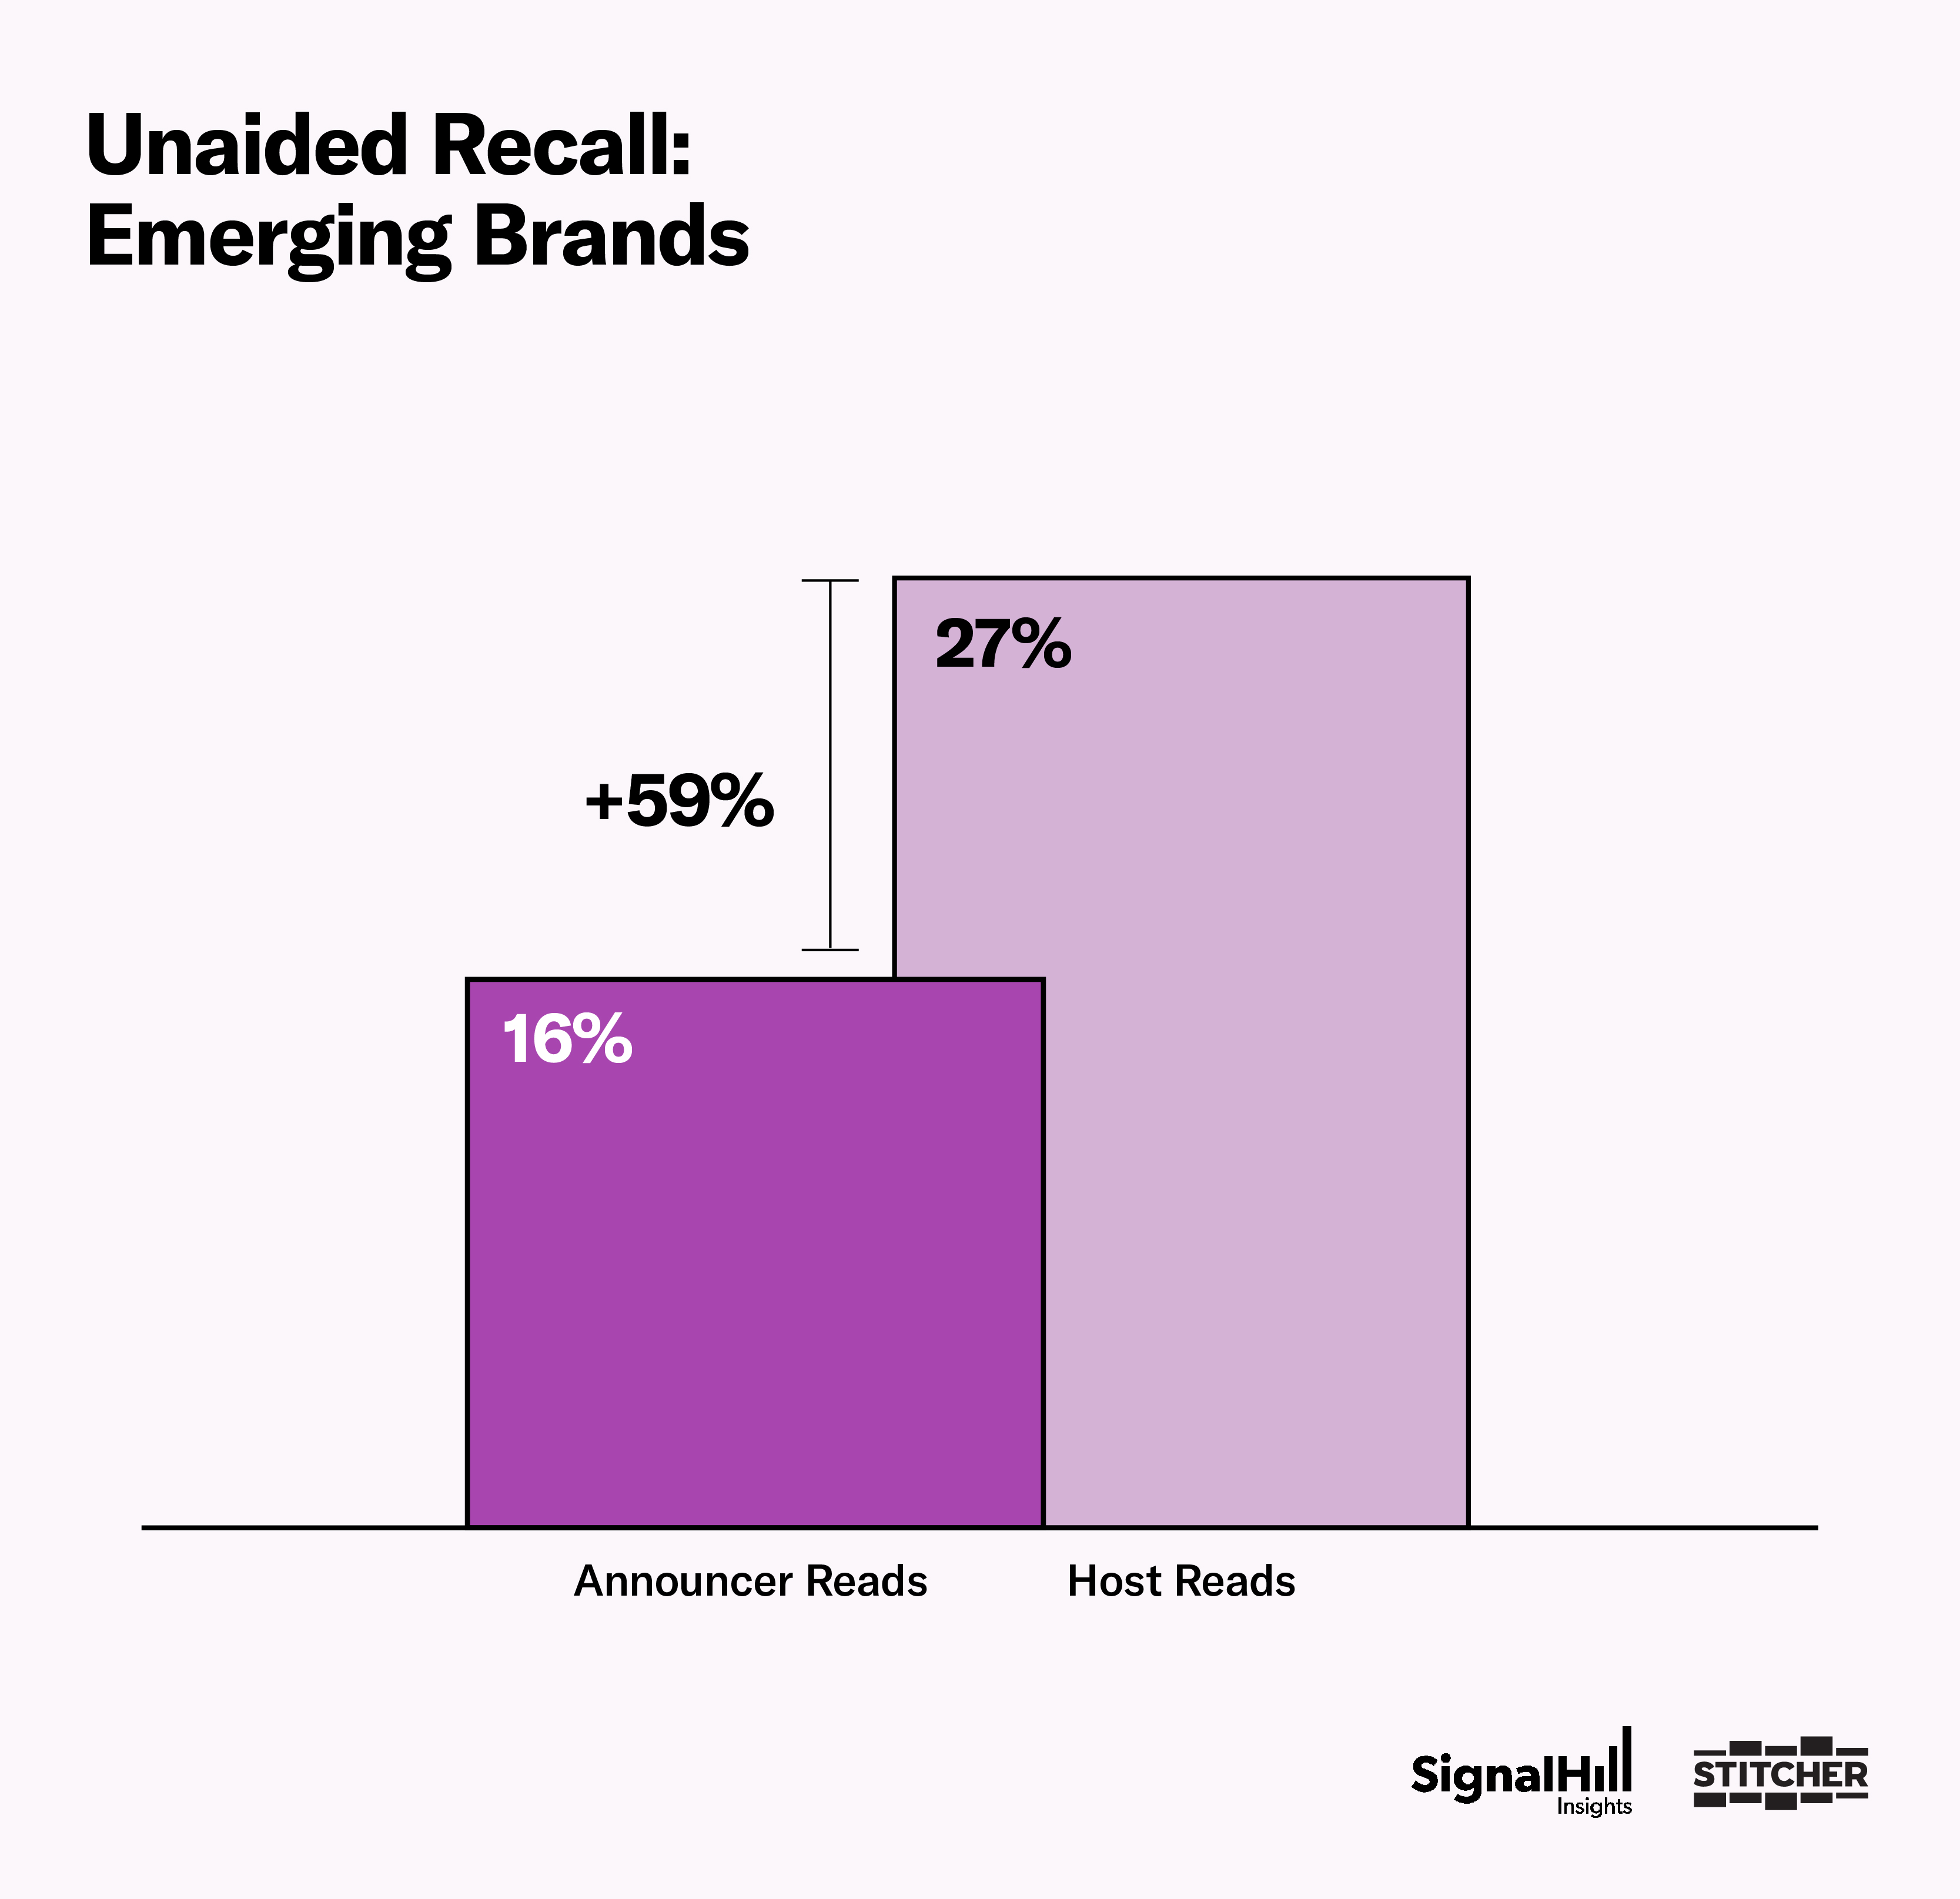 Unaided recall for emerging brands with host reads 